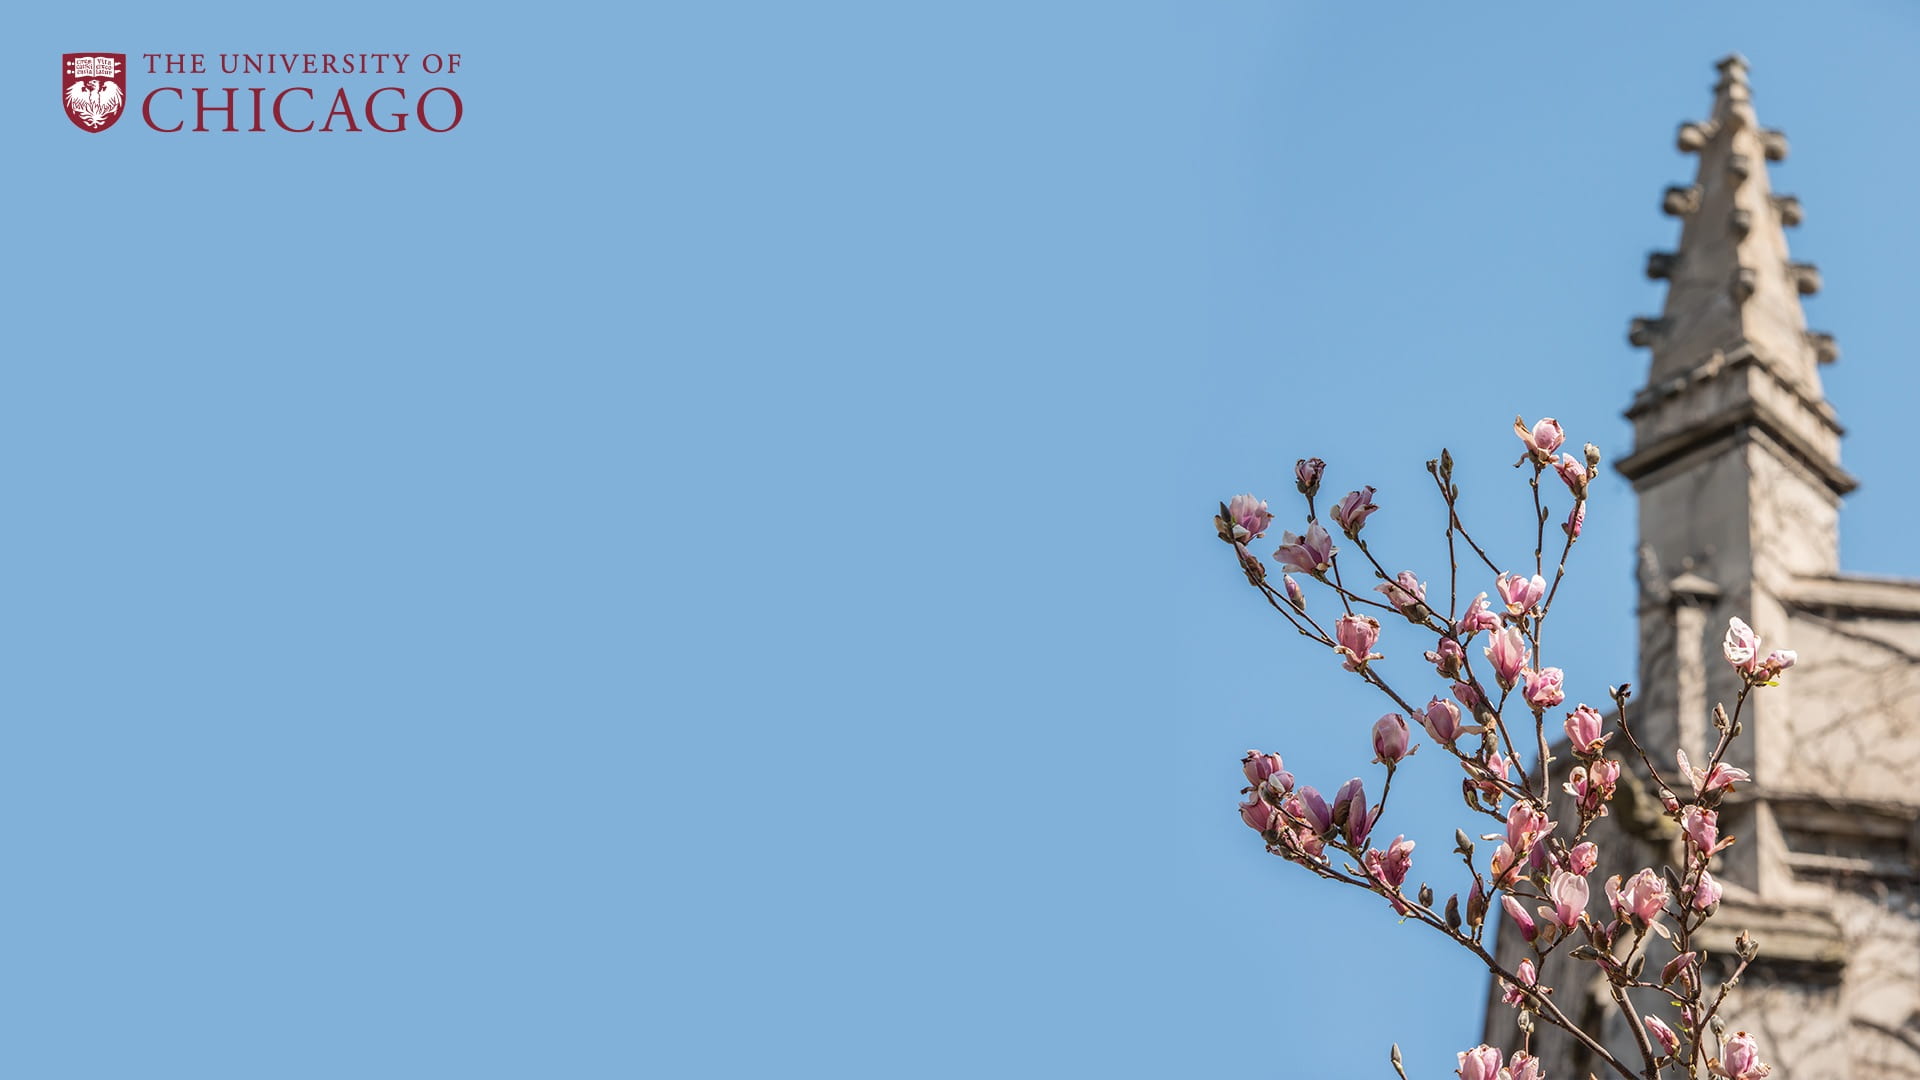 Stone spire of a building against a blue sky with pink flowers on a tree branch in front